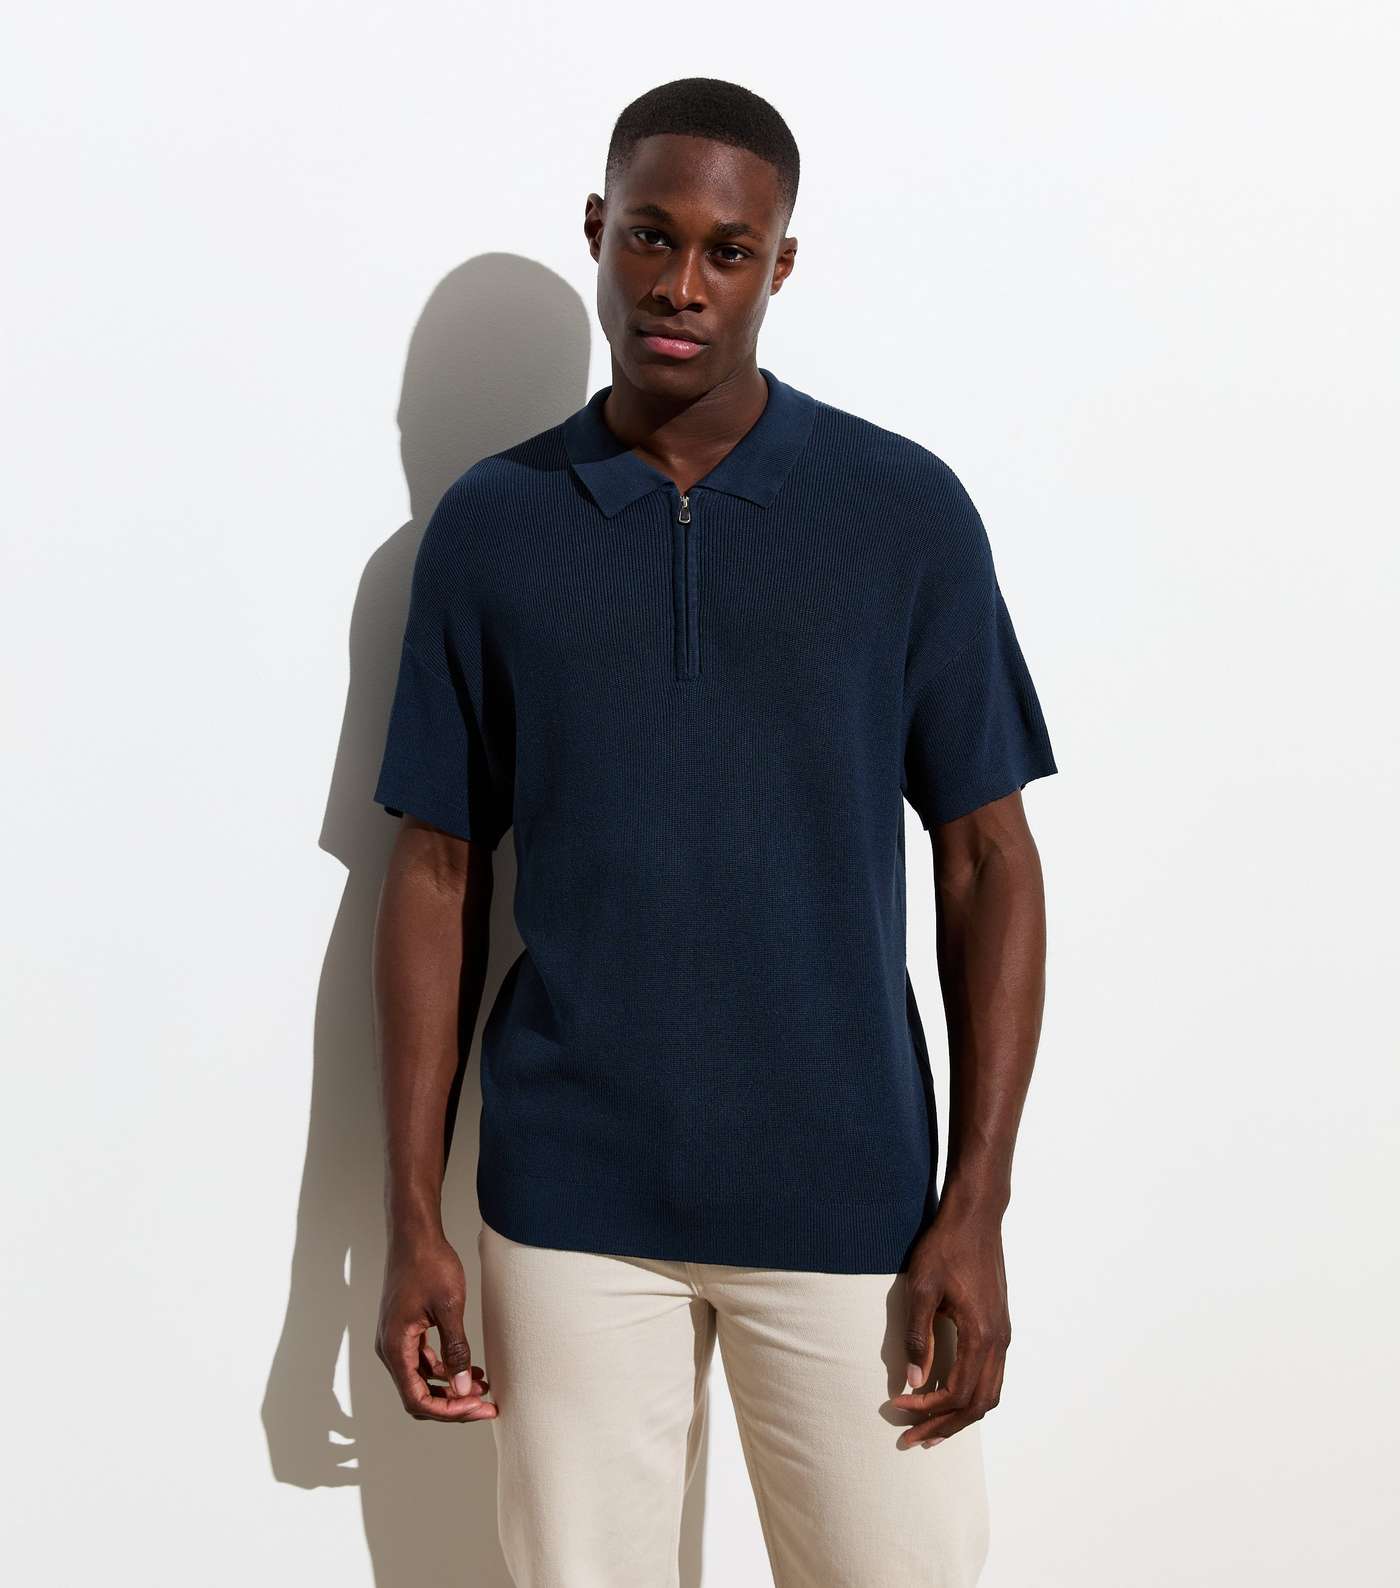 Navy Zip Neck Relaxed Fit Short Sleeve Knit Polo Shirt Image 2